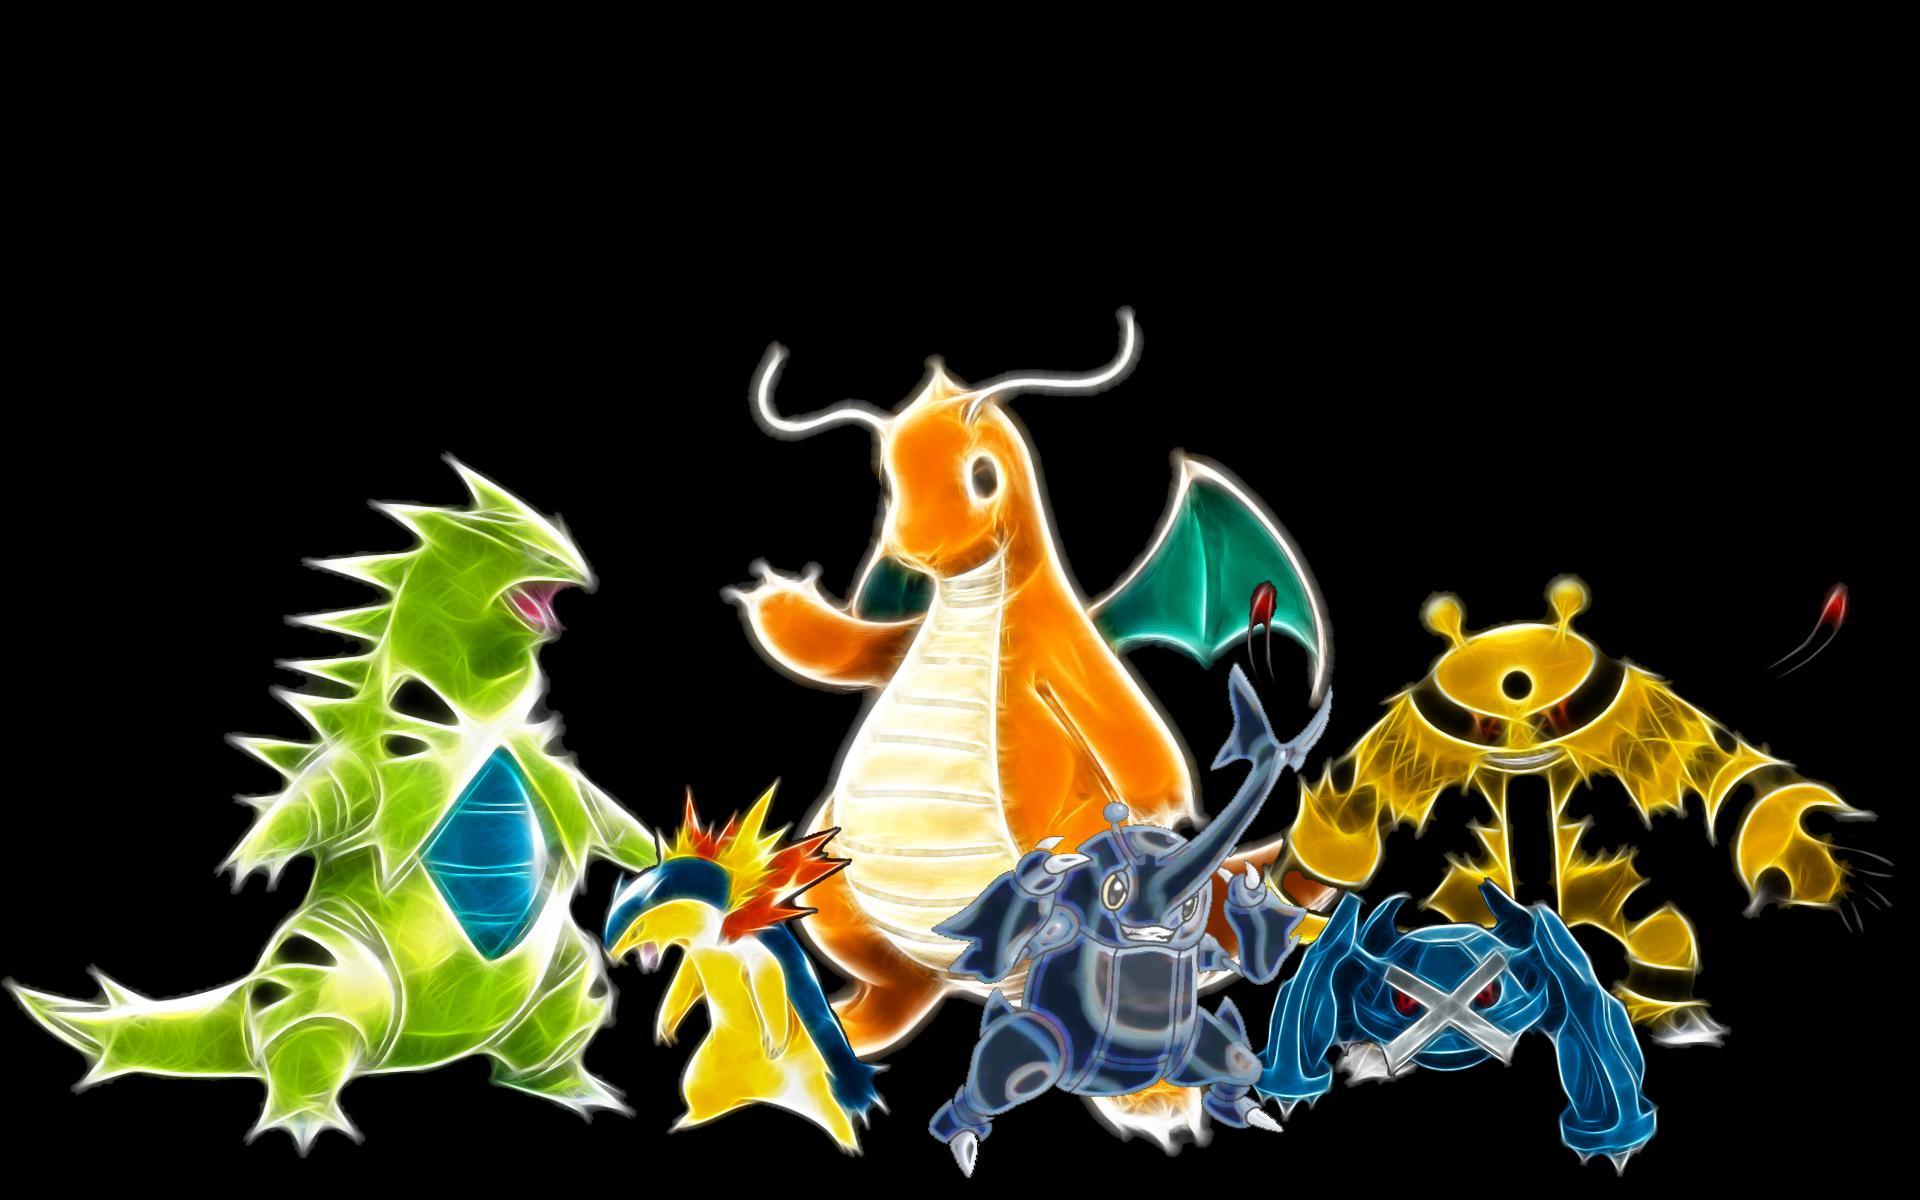 Taking request for Pokemon wallpaper, these are 2 I&;ve already